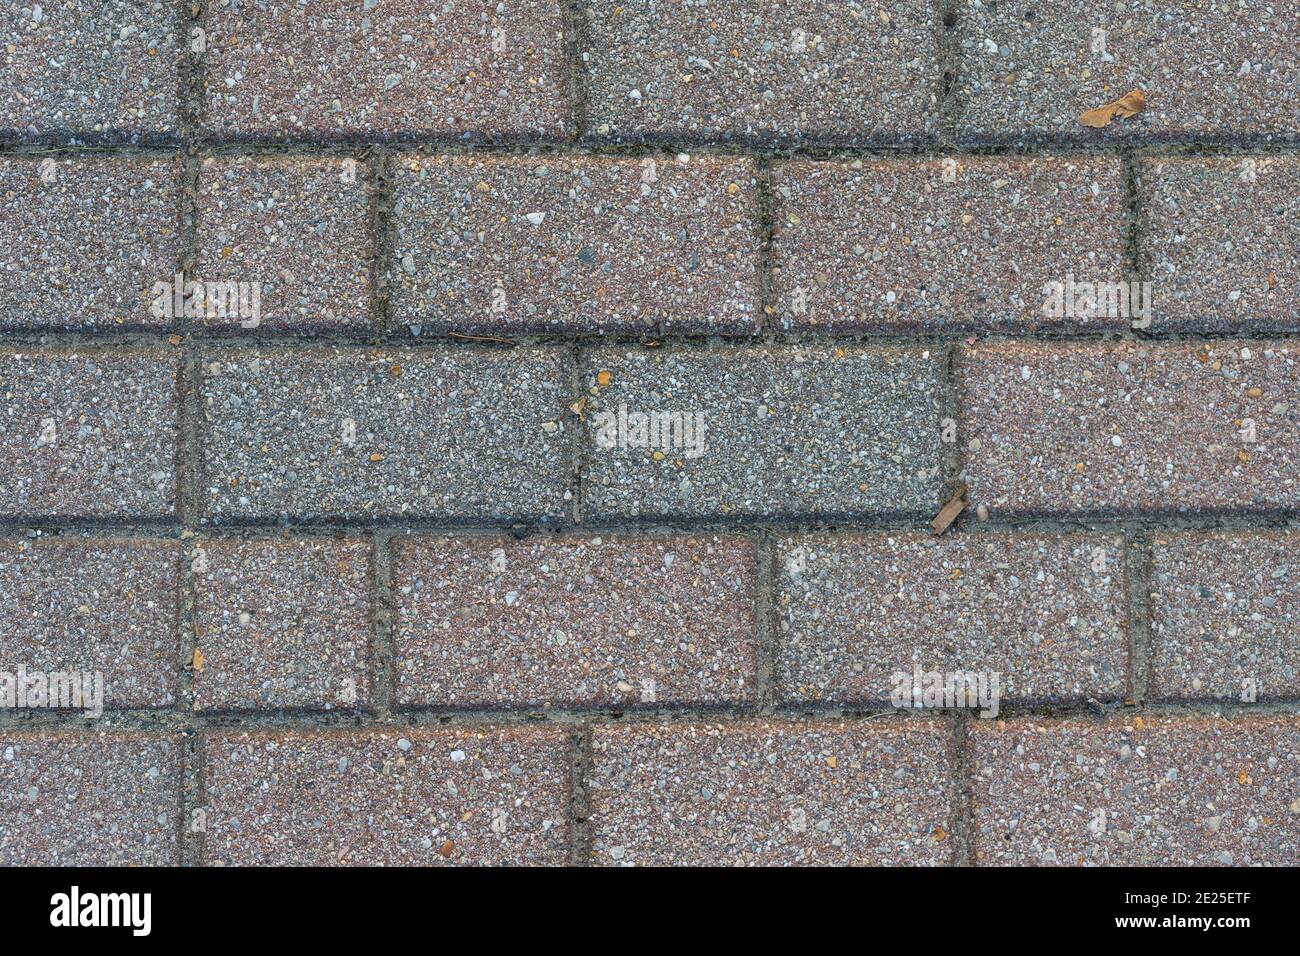 Top view of several rows of paving bricks in the early morning light. Stock Photo